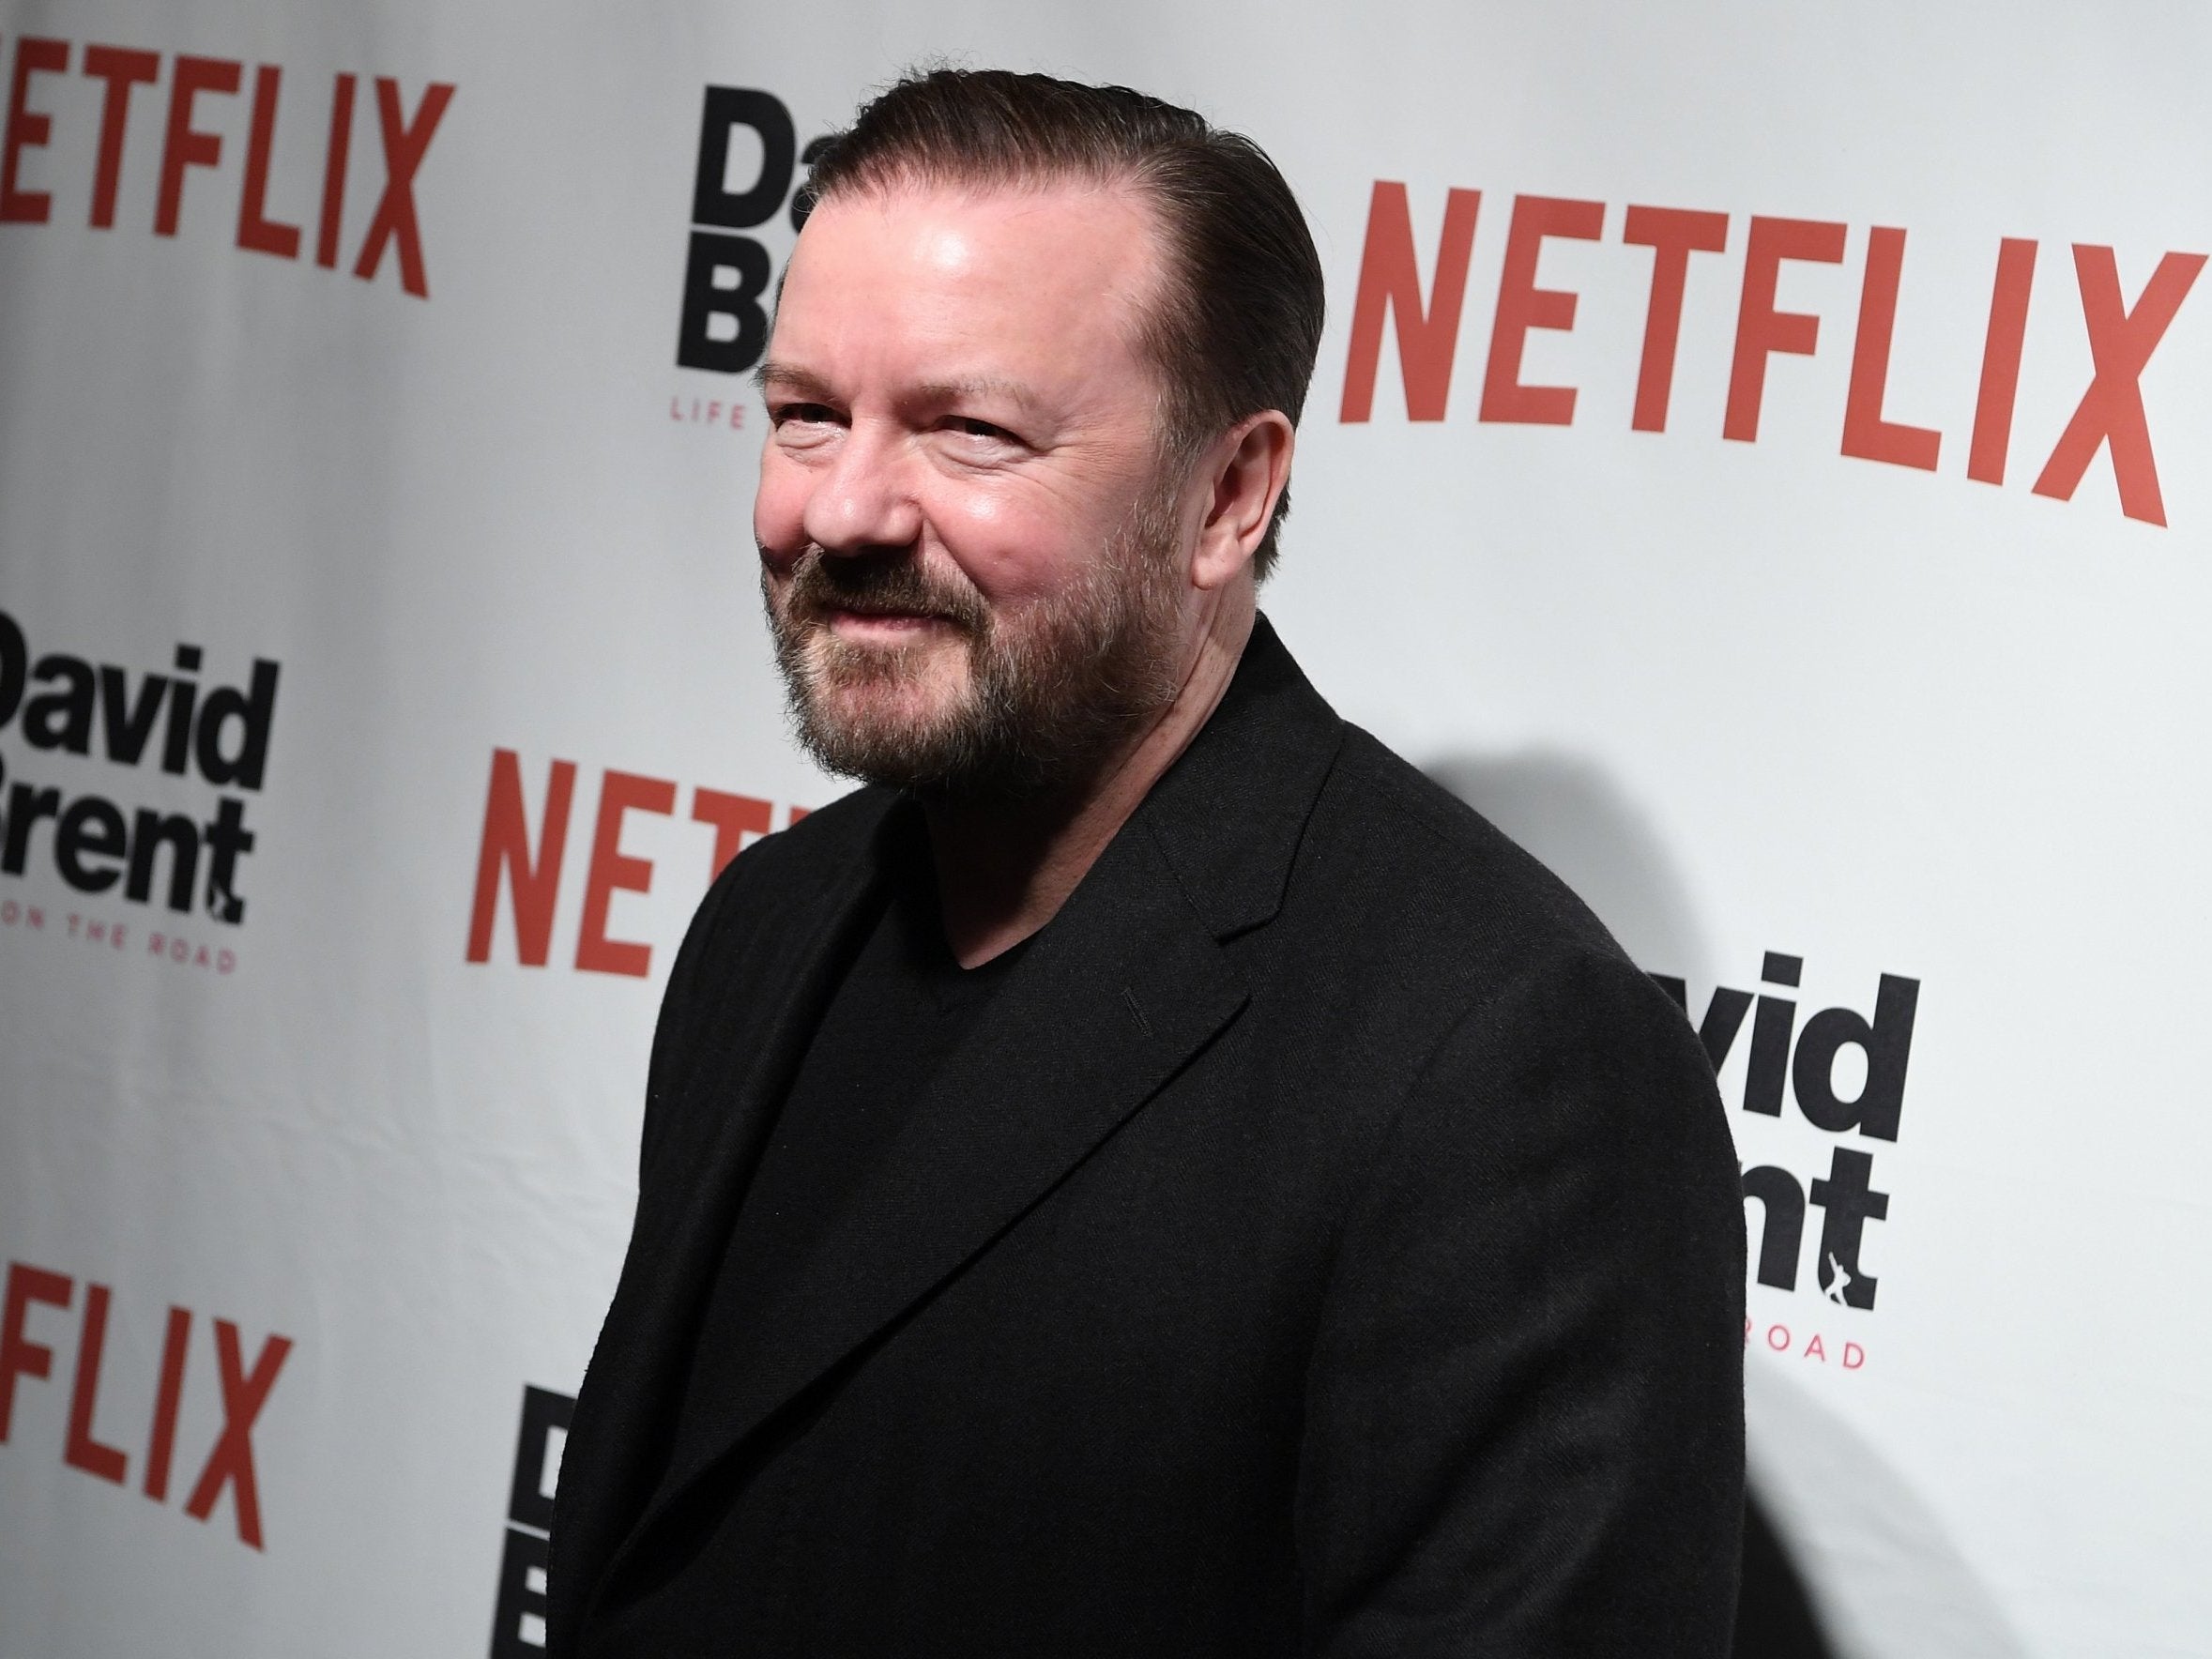 Ricky Gervais has shared his thoughts on reports the Oscars will have no host